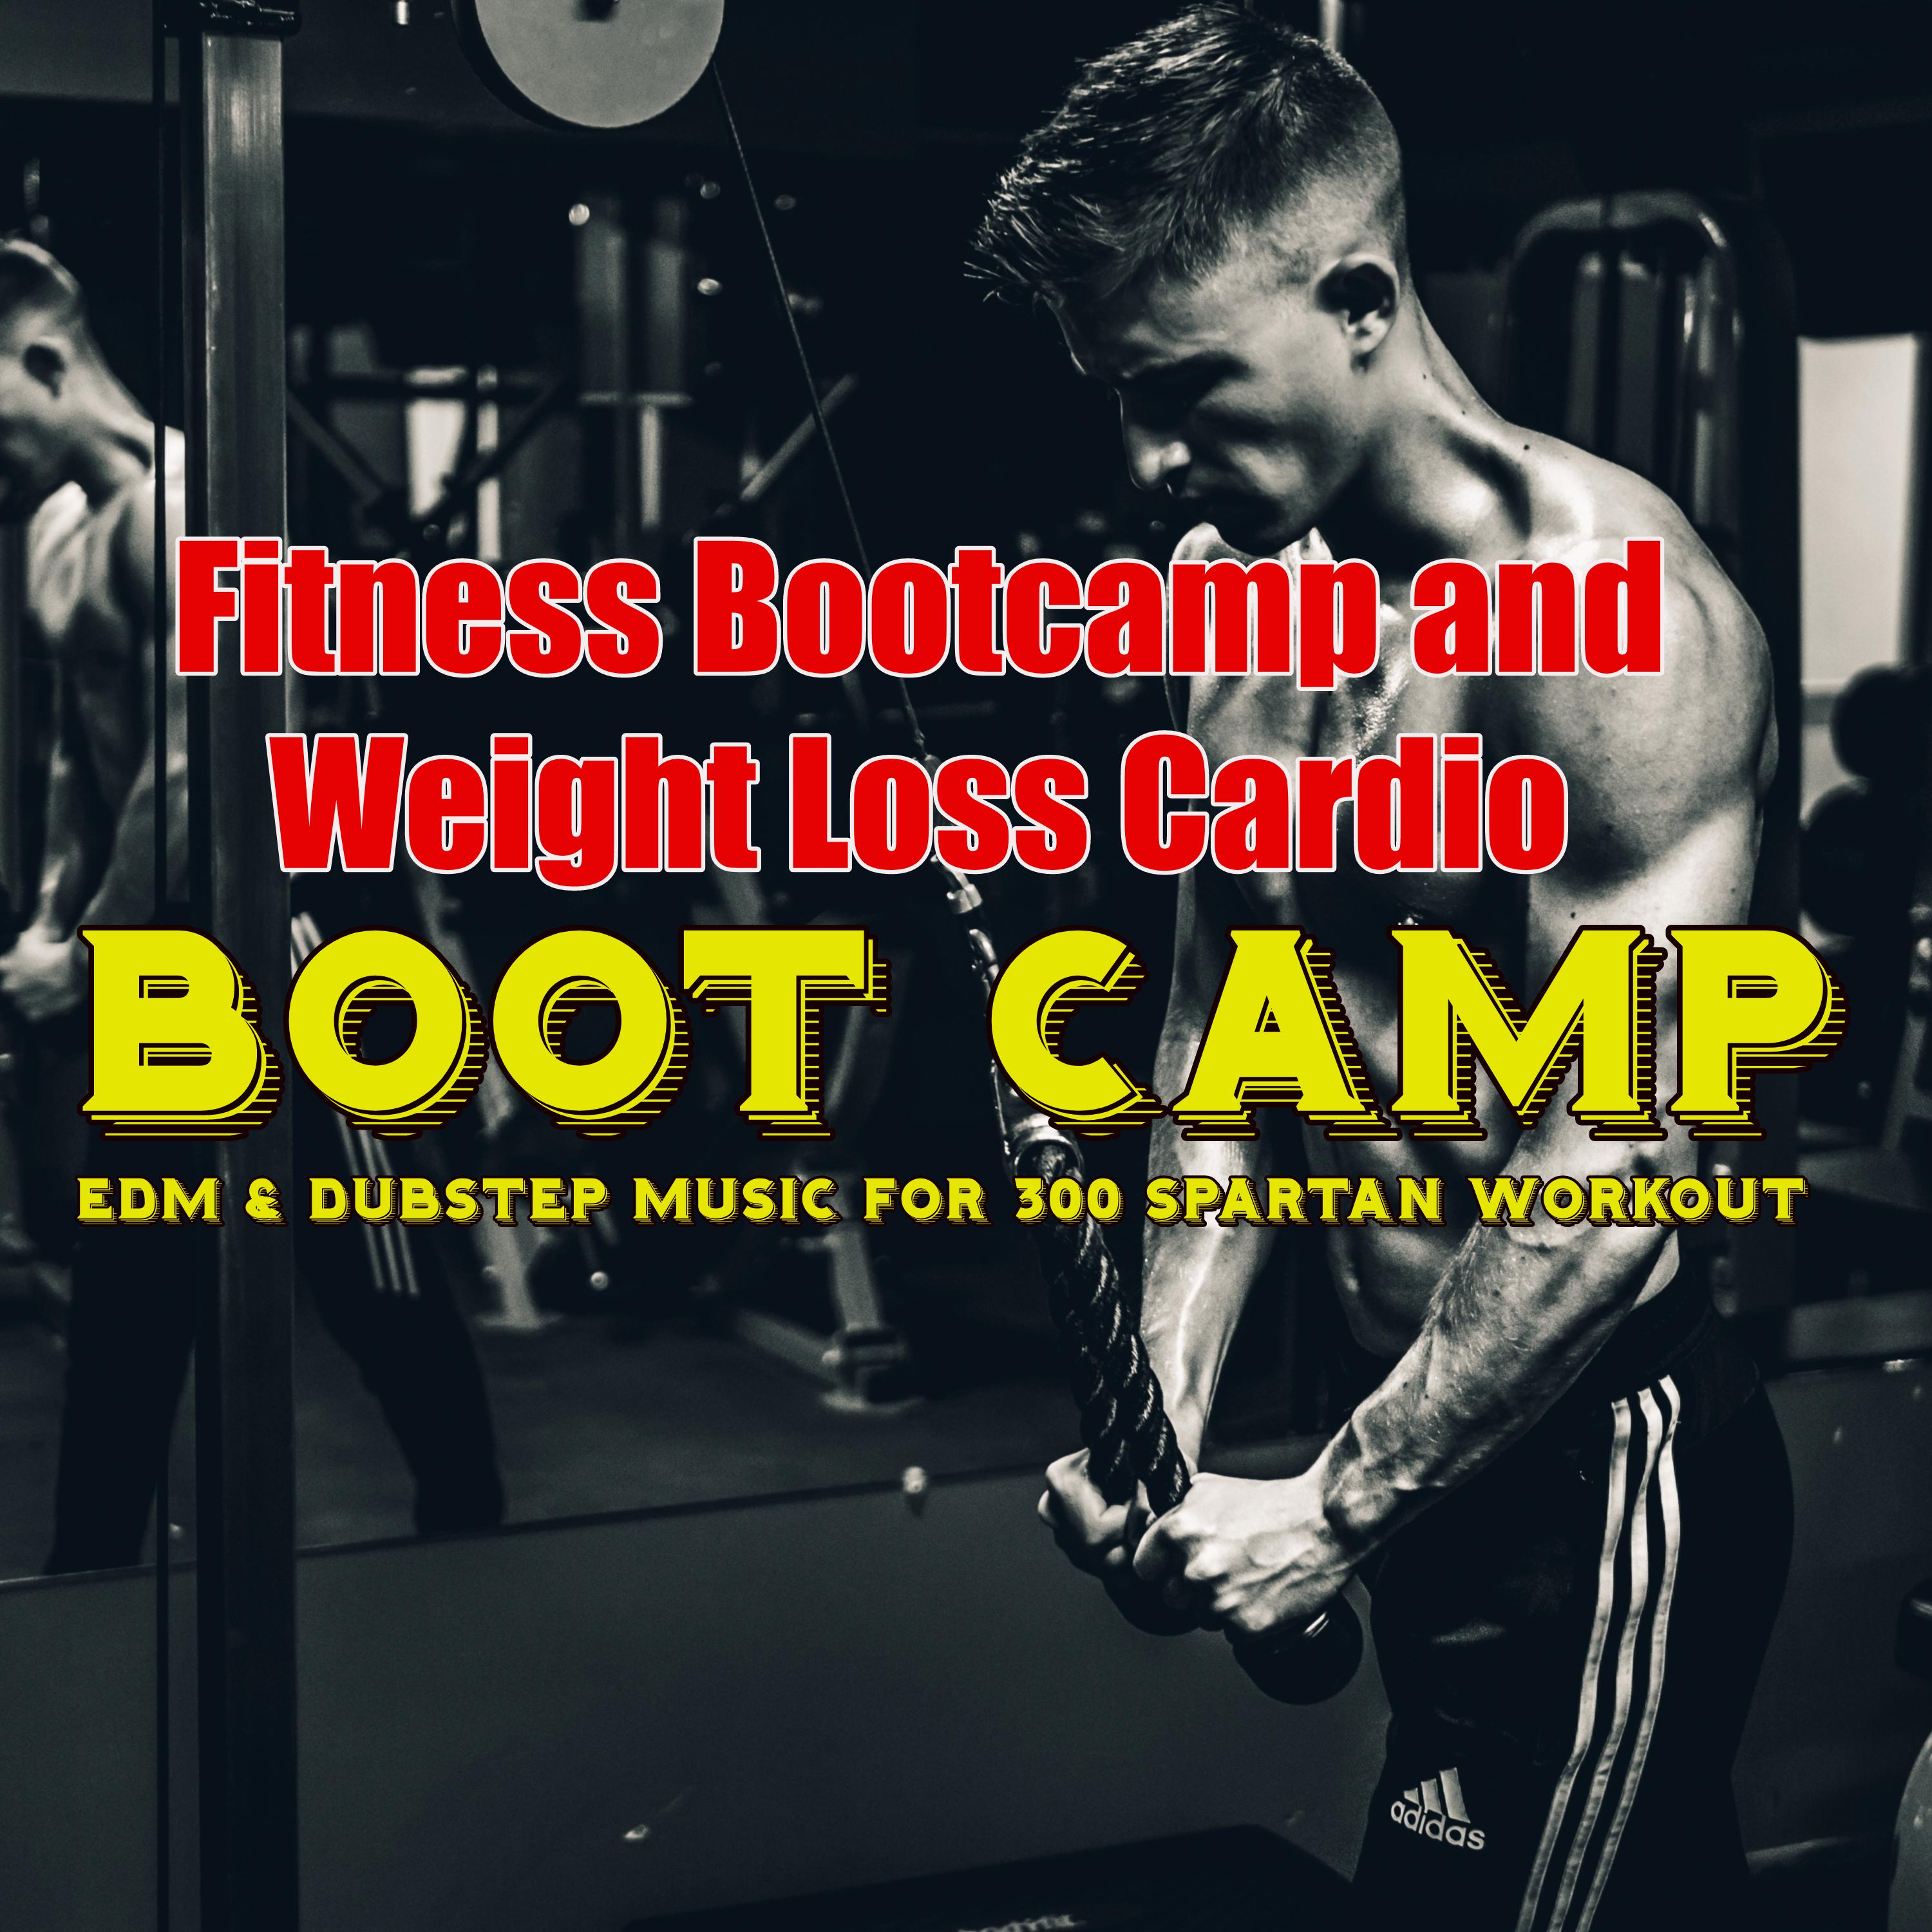 Downtempo - Workout Songs